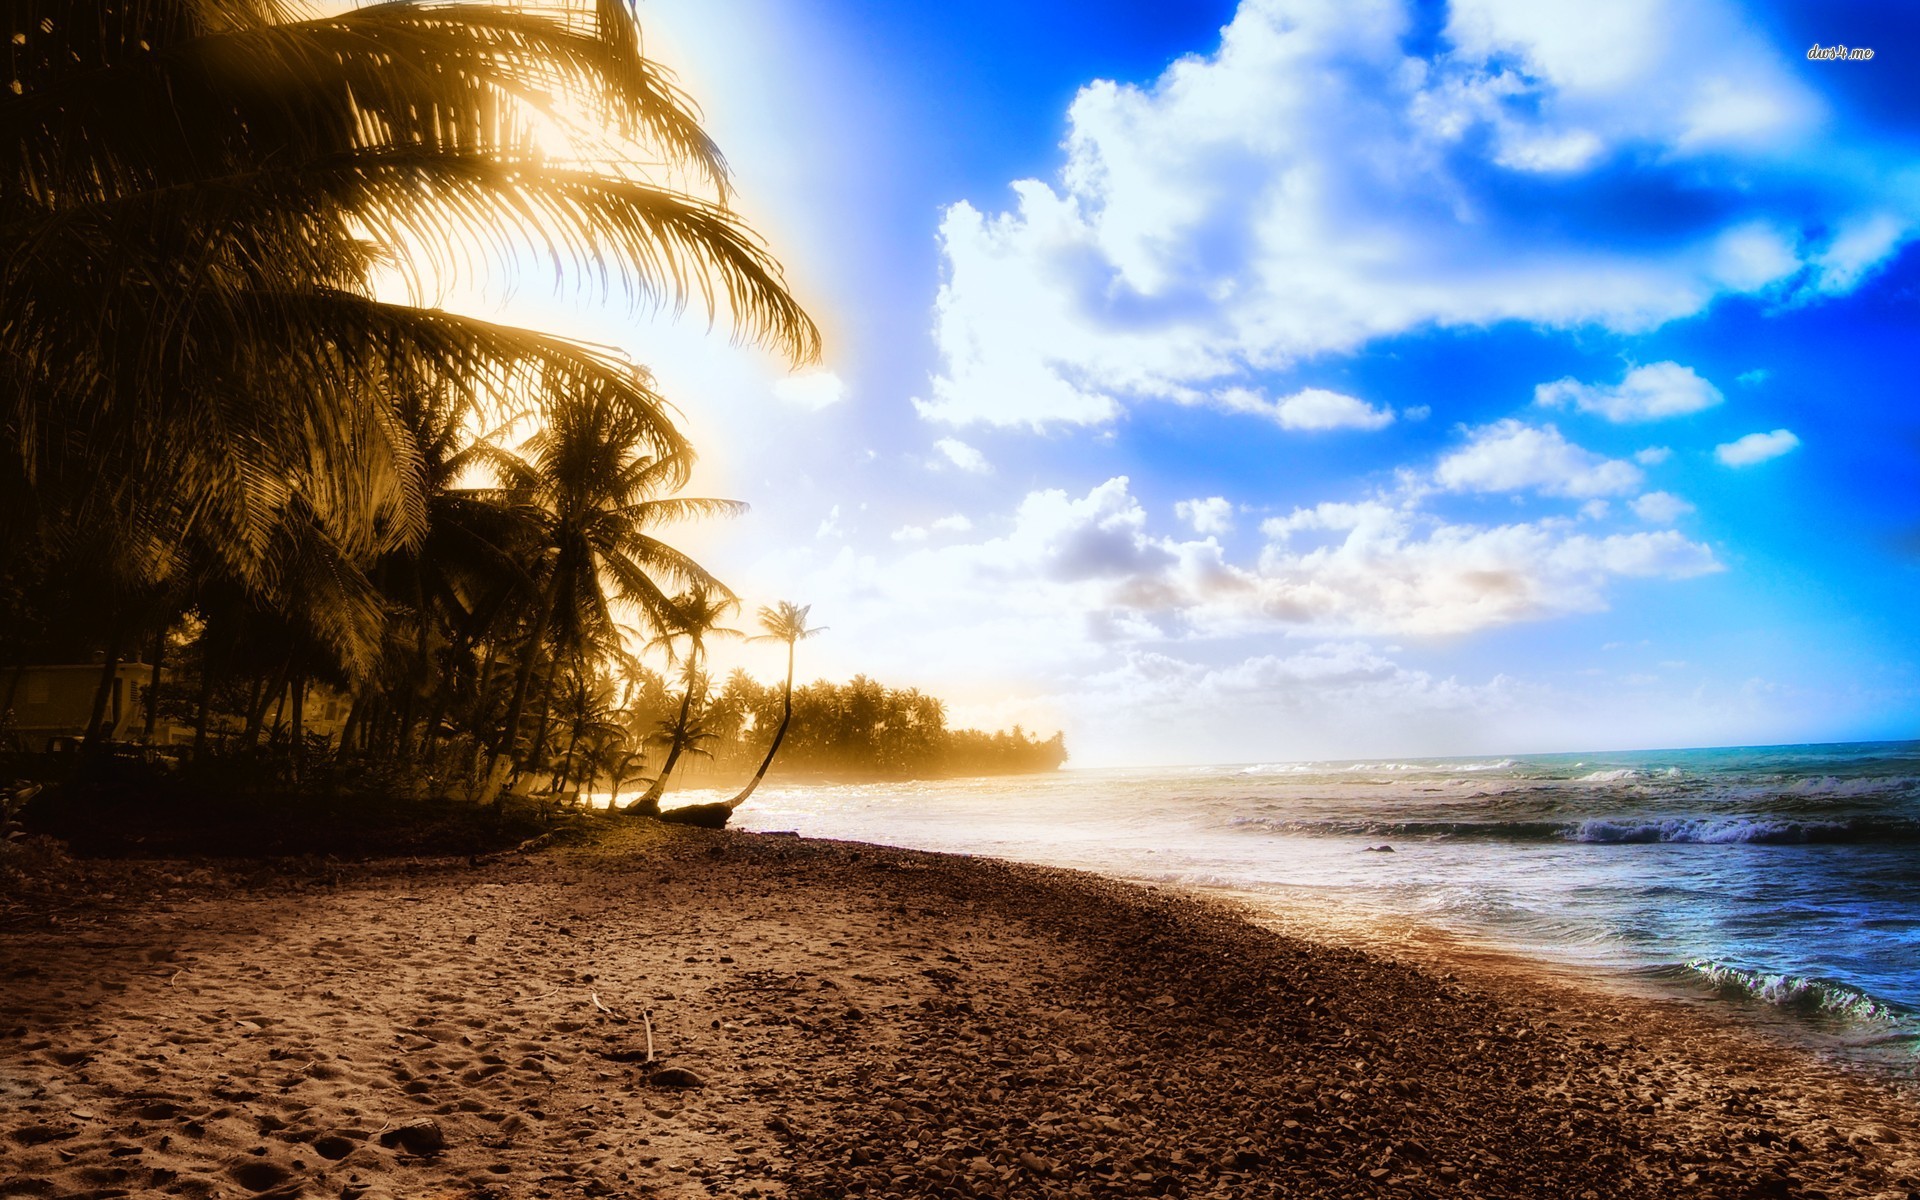 palm trees on the beach | Desktop Backgrounds for Free HD ...